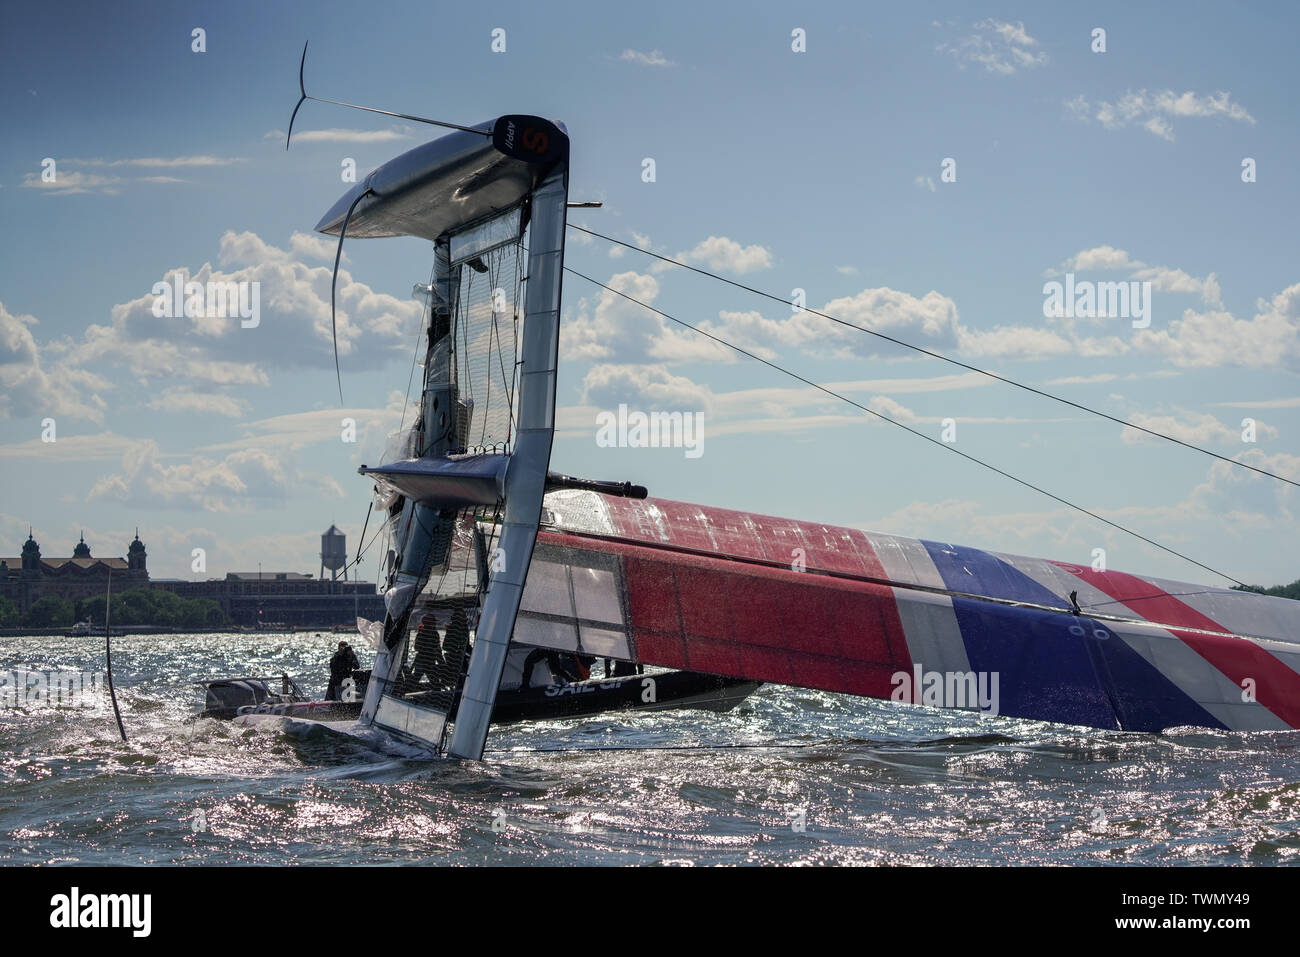 The Great Britain SailGP Team’s F50 after capsizing during the build-up to race 1 during Race Day 1 Event 3 Season 1 SailGP event in New York, United States. Stock Photo